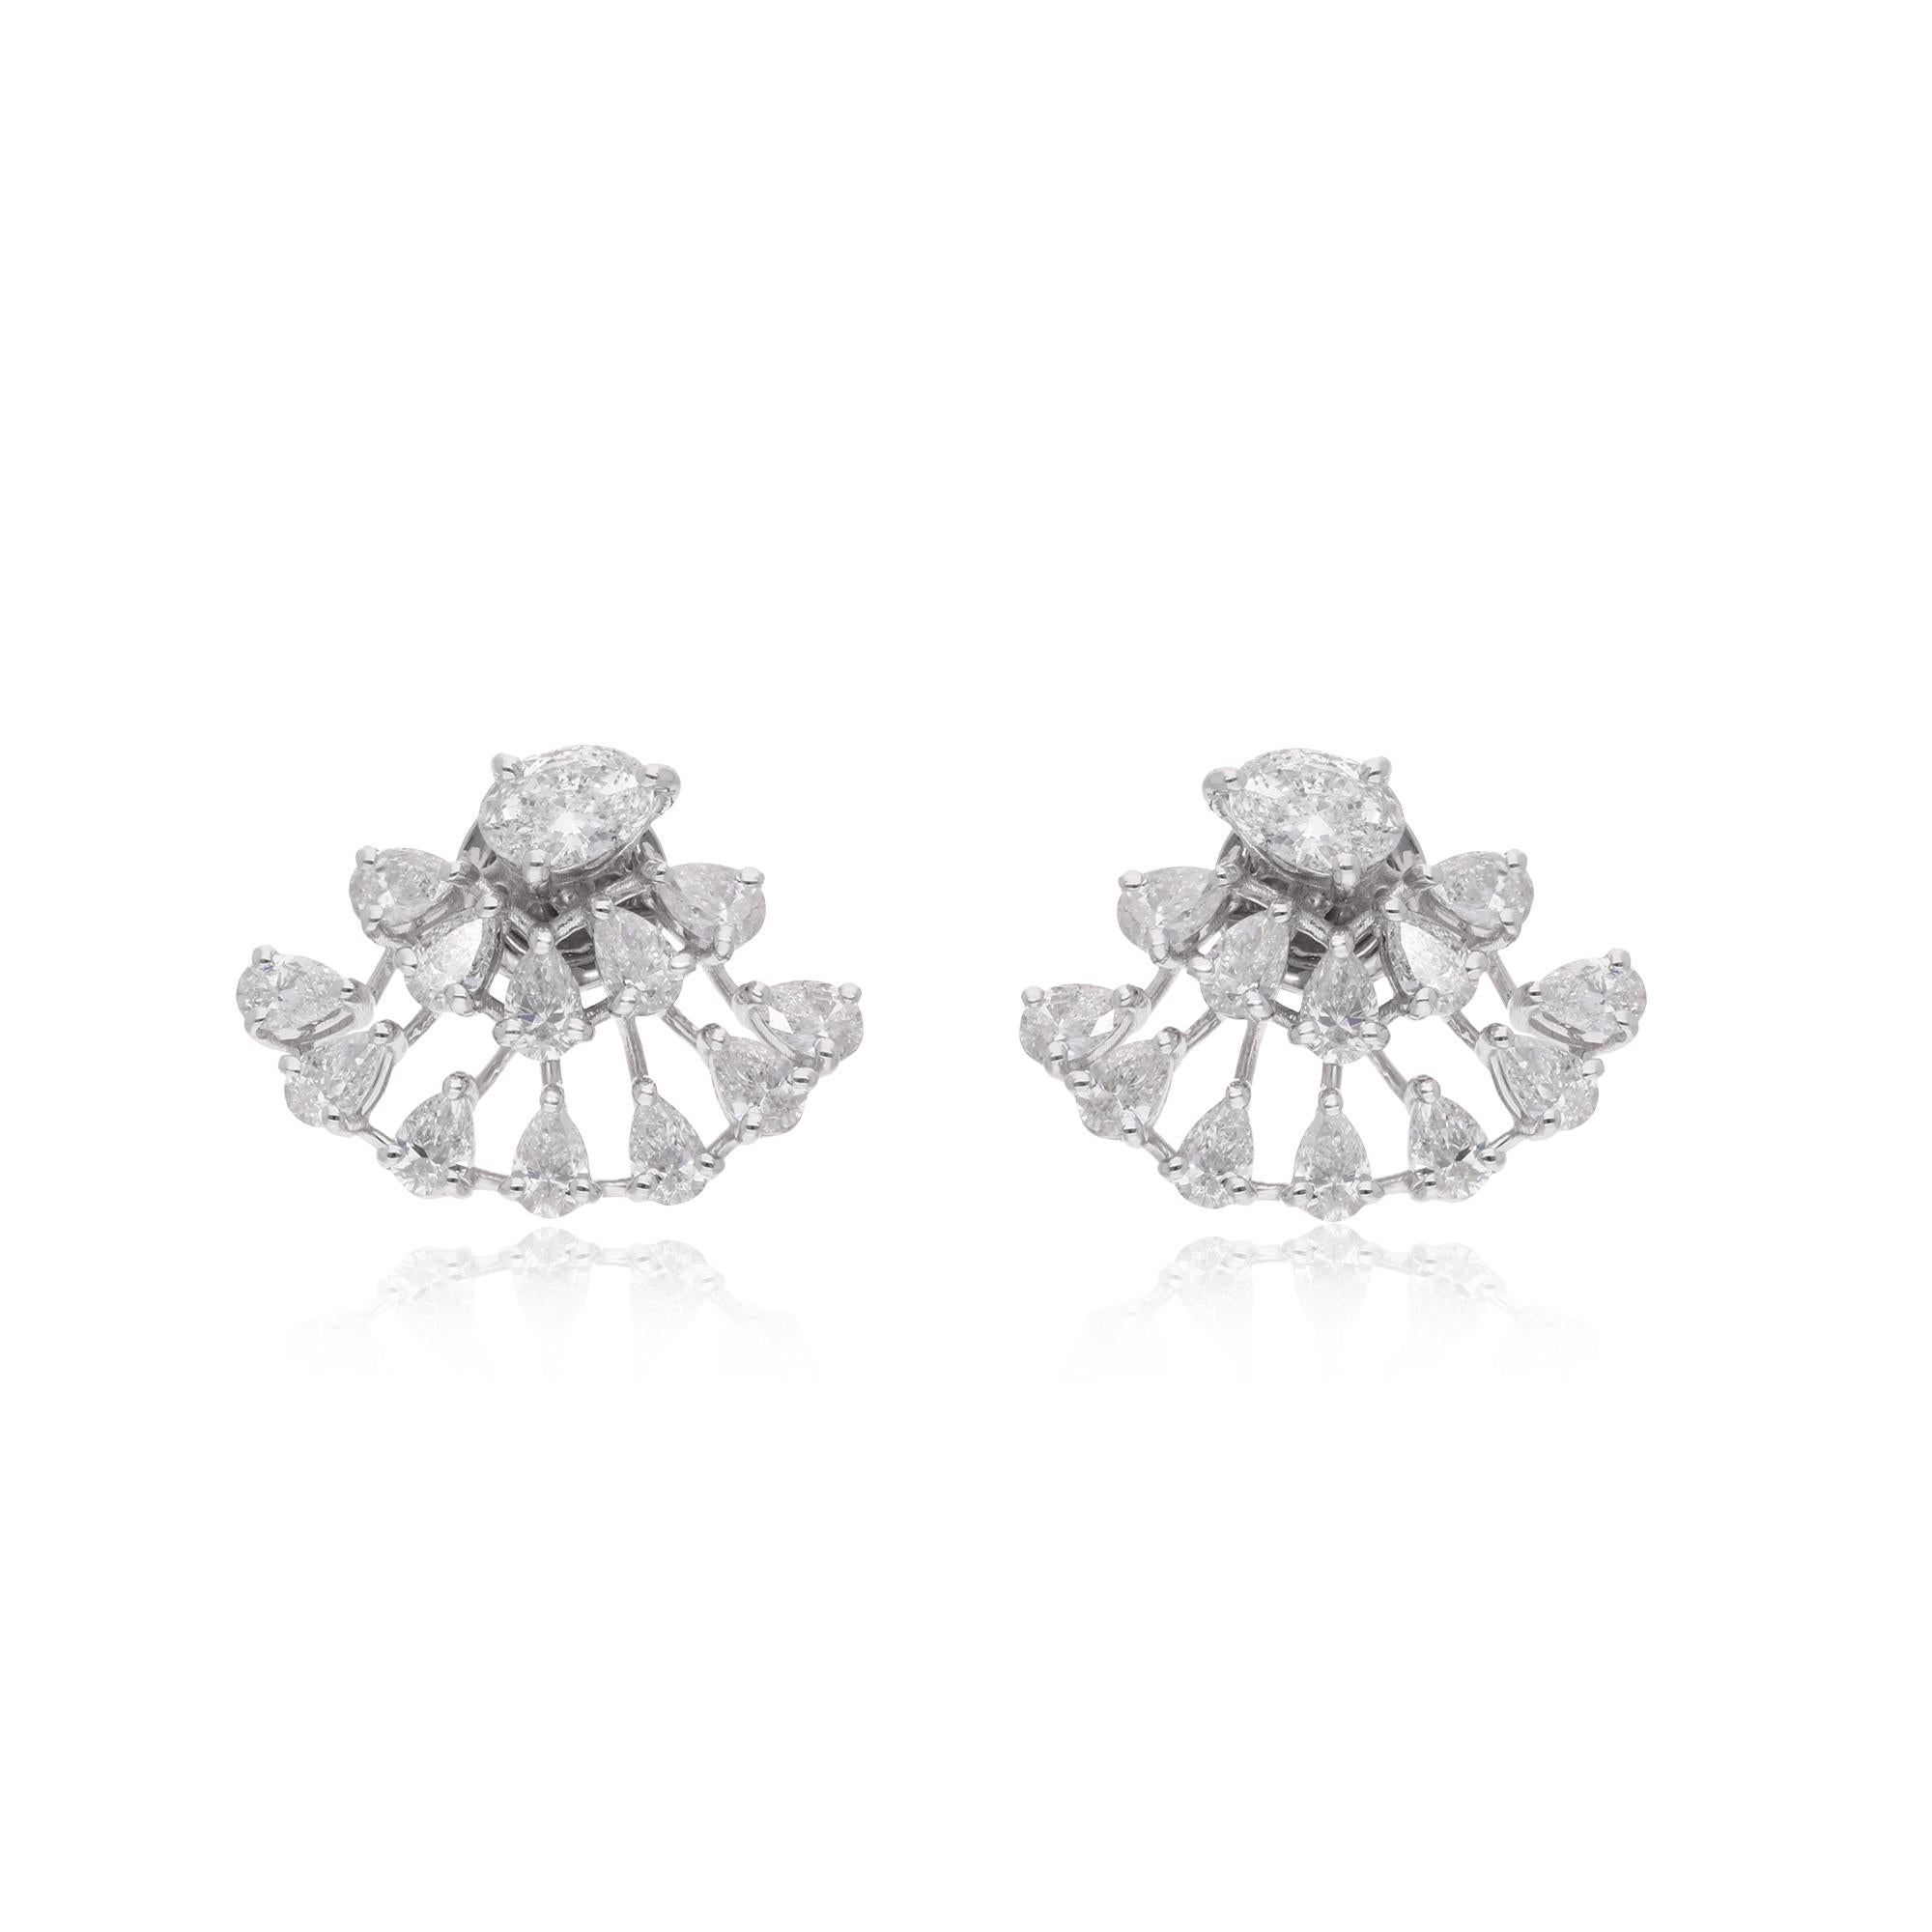 Elevate your style with these exquisite Diamond Stud Earrings featuring a stunning spider web design. These earrings are available in 10k/14k/18k, Rose Gold/Yellow Gold/White Gold.

These are perfect Gift for Mom, Fiancée, Daughter, Wife and